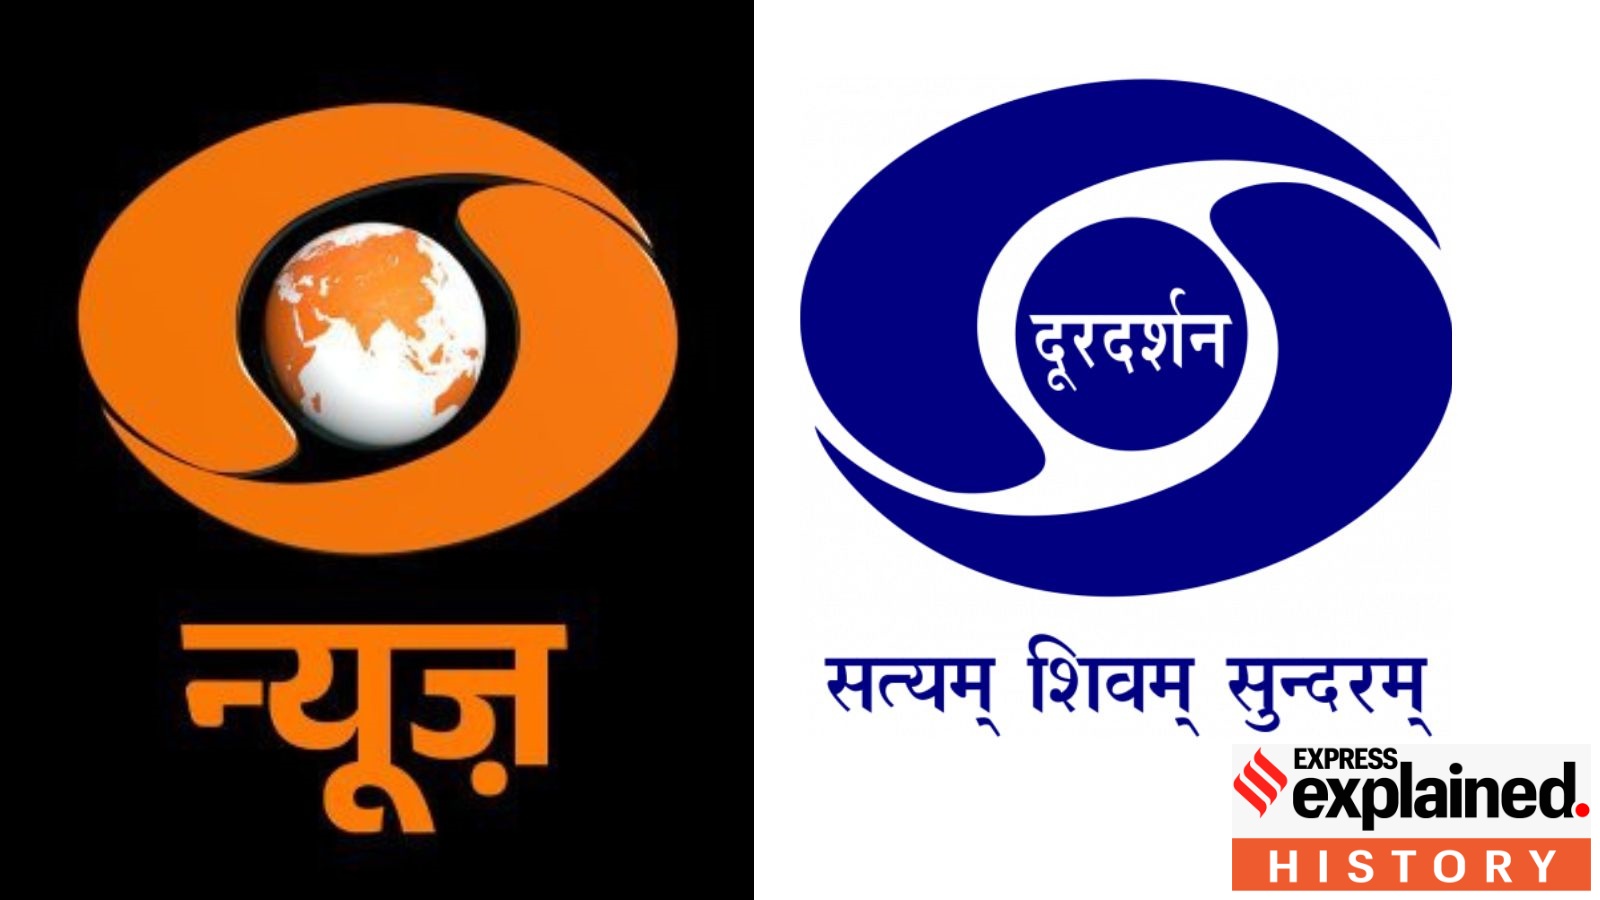 The story of Doordarshan’s iconic logo, now in controversy over its ...